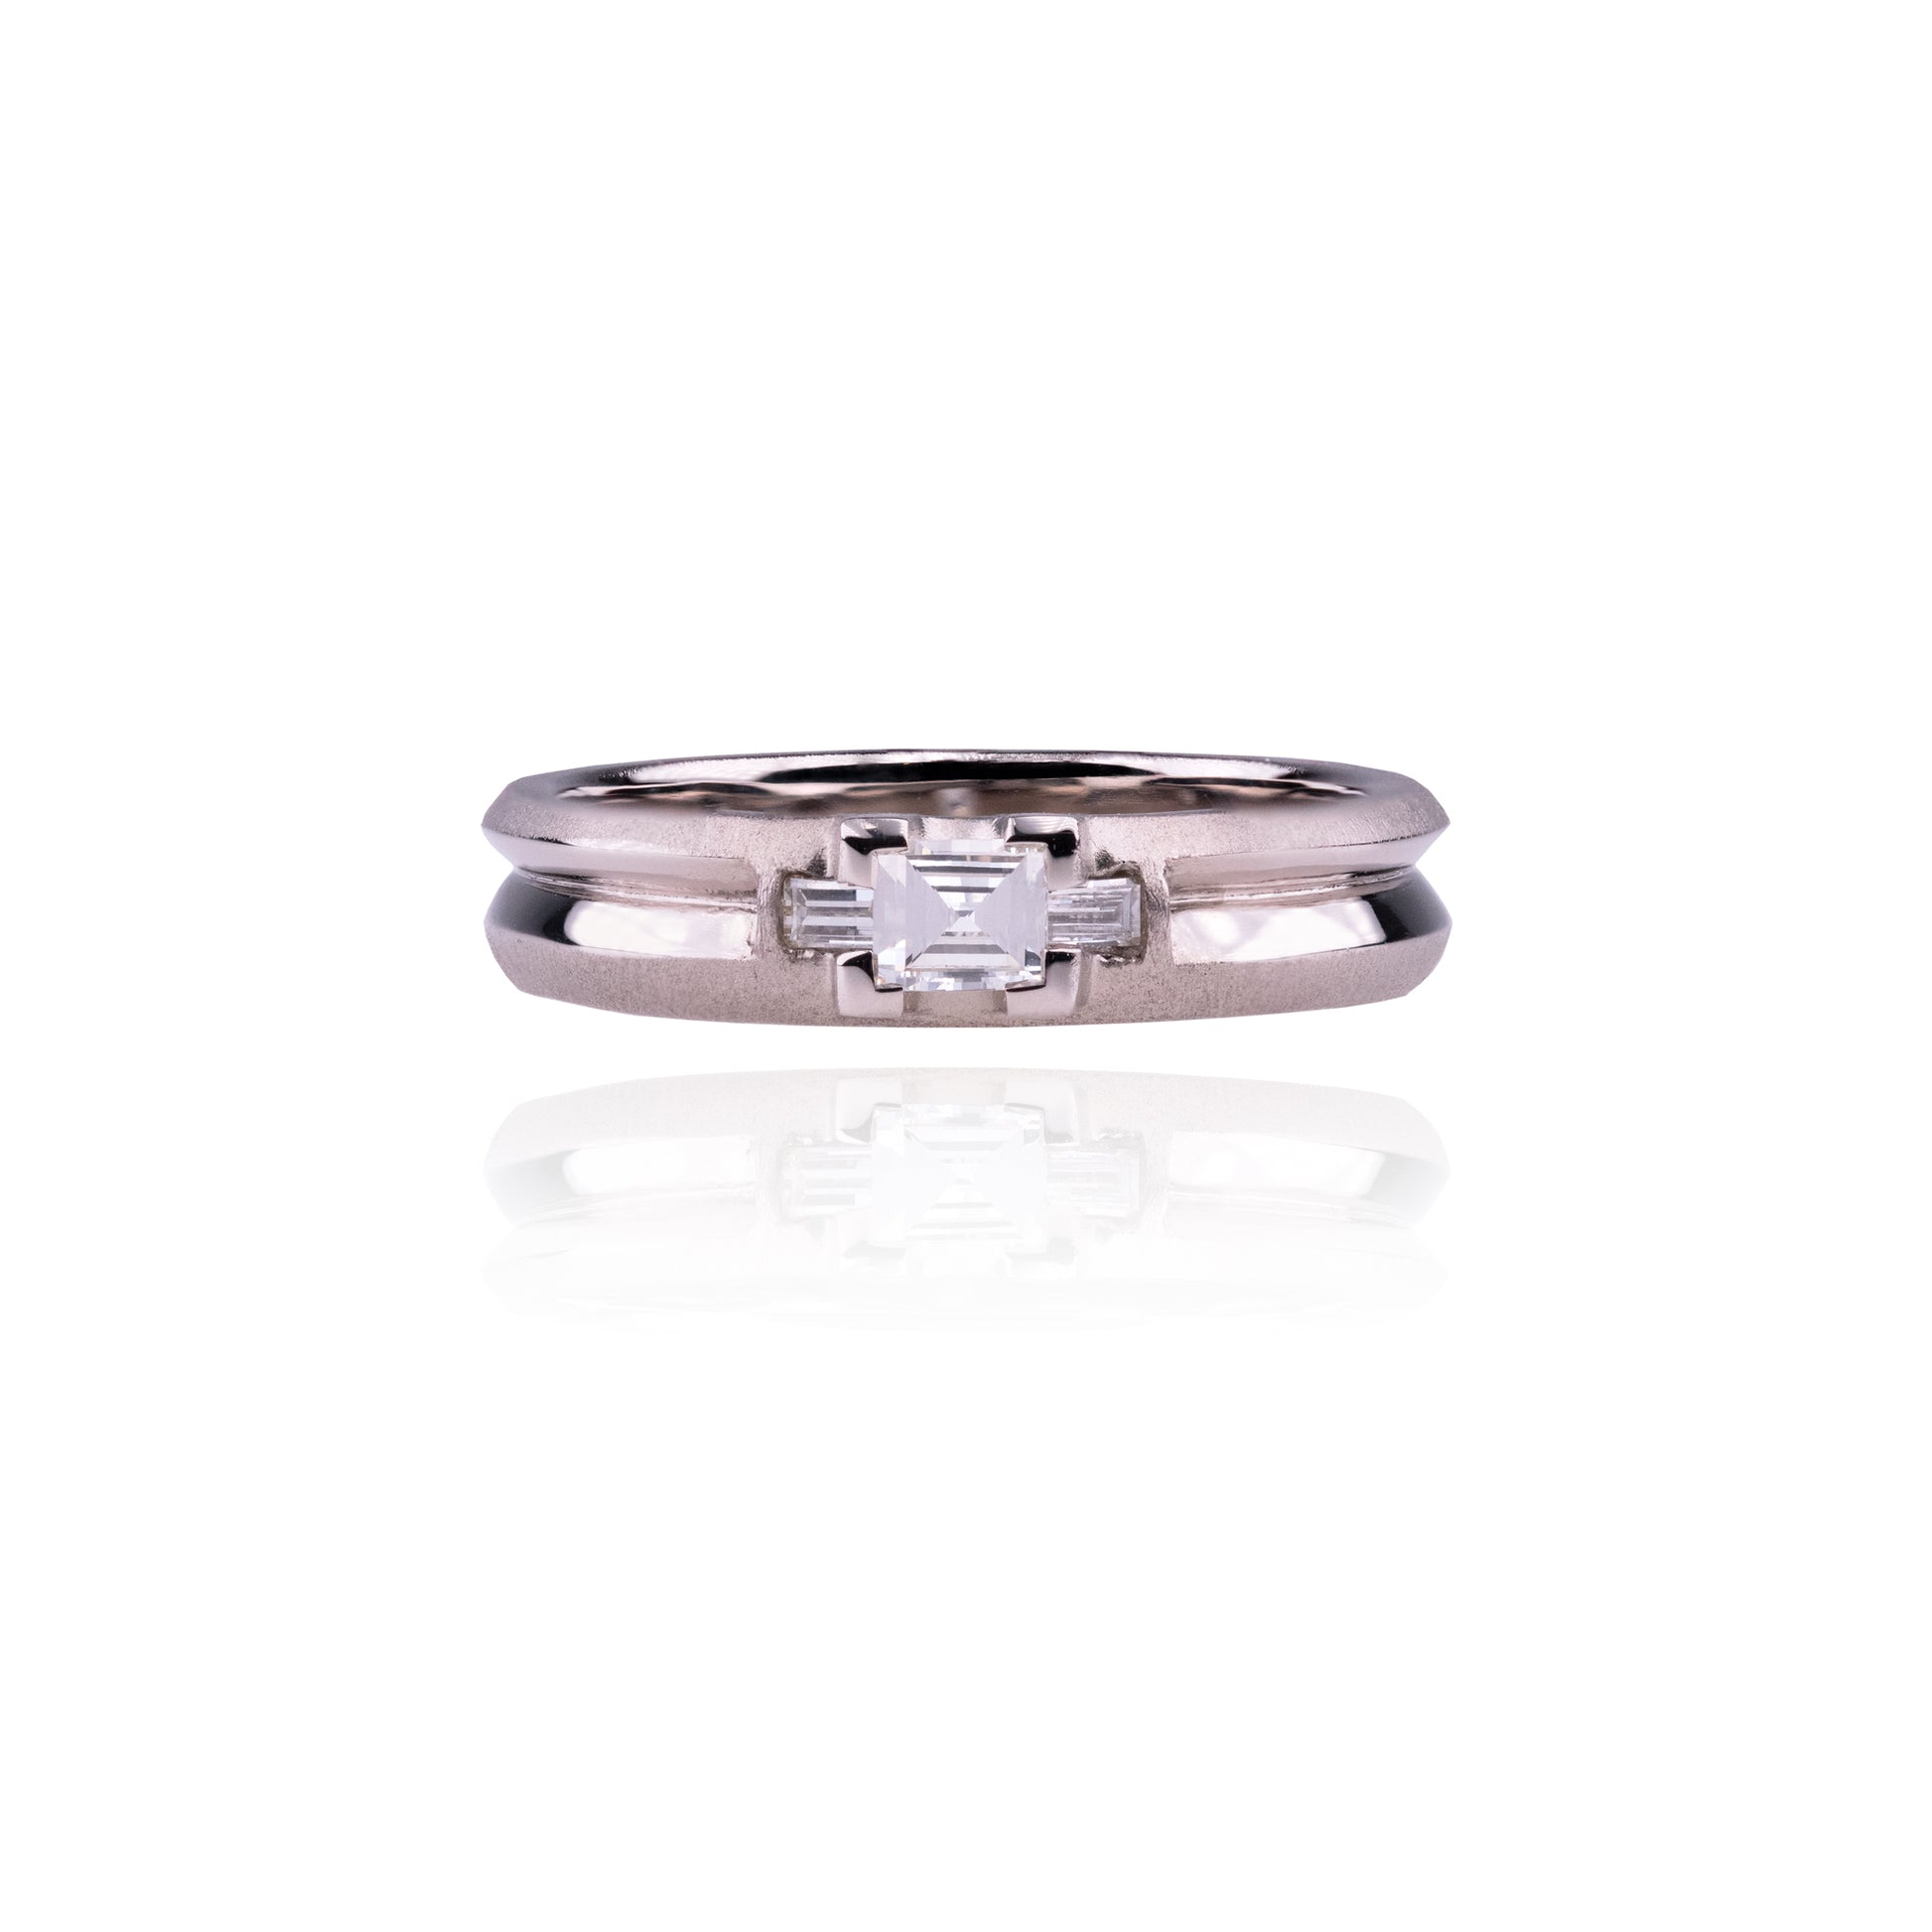 Orme-Brown Contemporary Fine Jewellery Ethical Engagement ring in sustainable recycled 18ct white gold with recycled step cut square and baguette diamonds